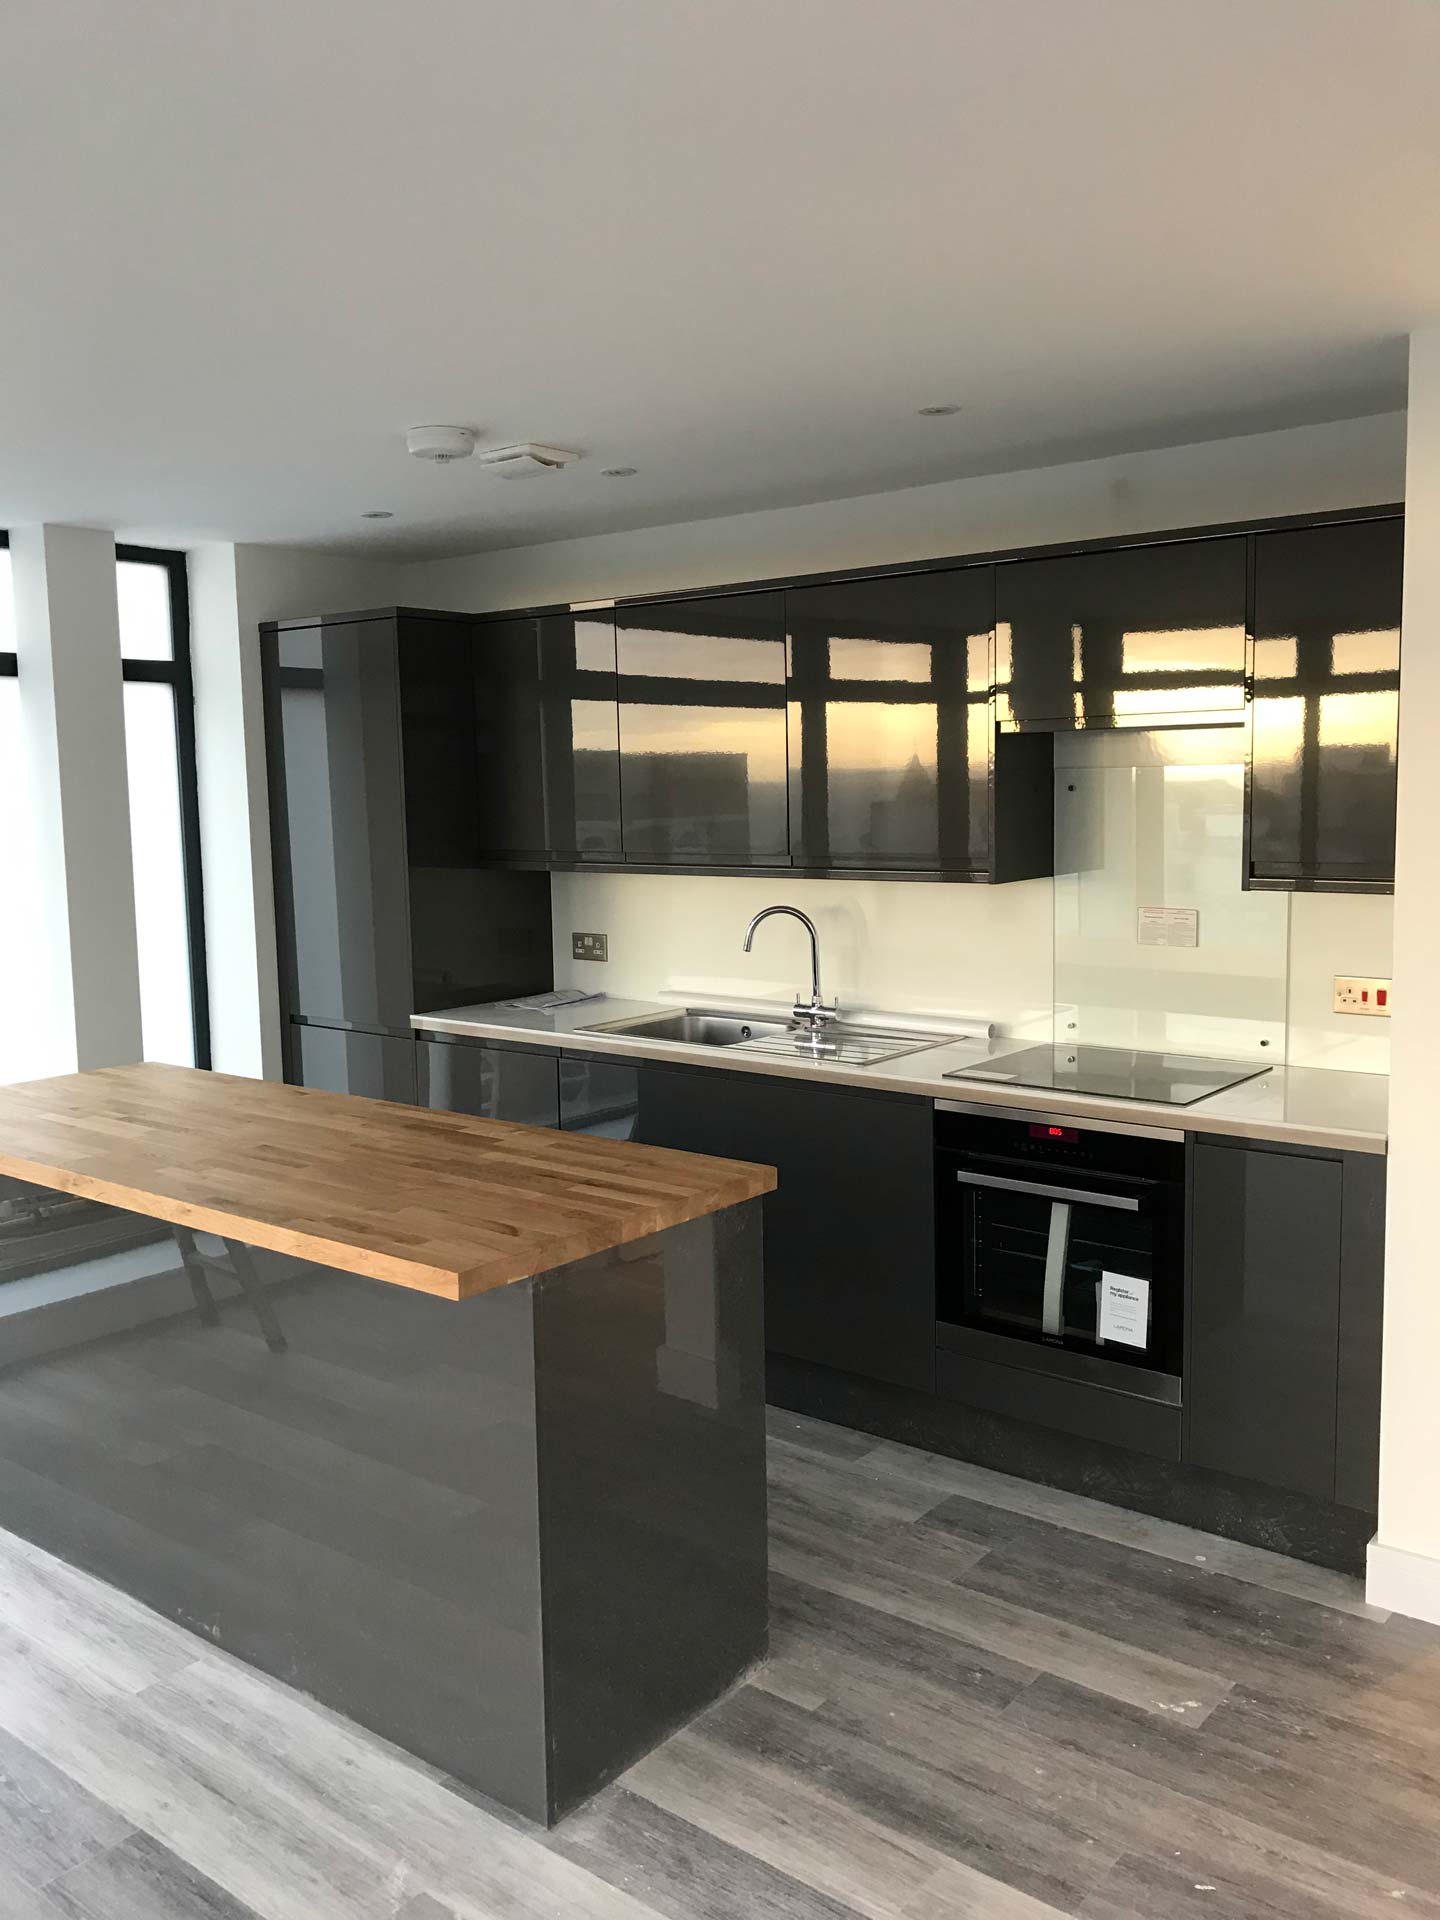 Kitchen Fit for a New Build in Hinton Road Bournemouth by Emerald Builders